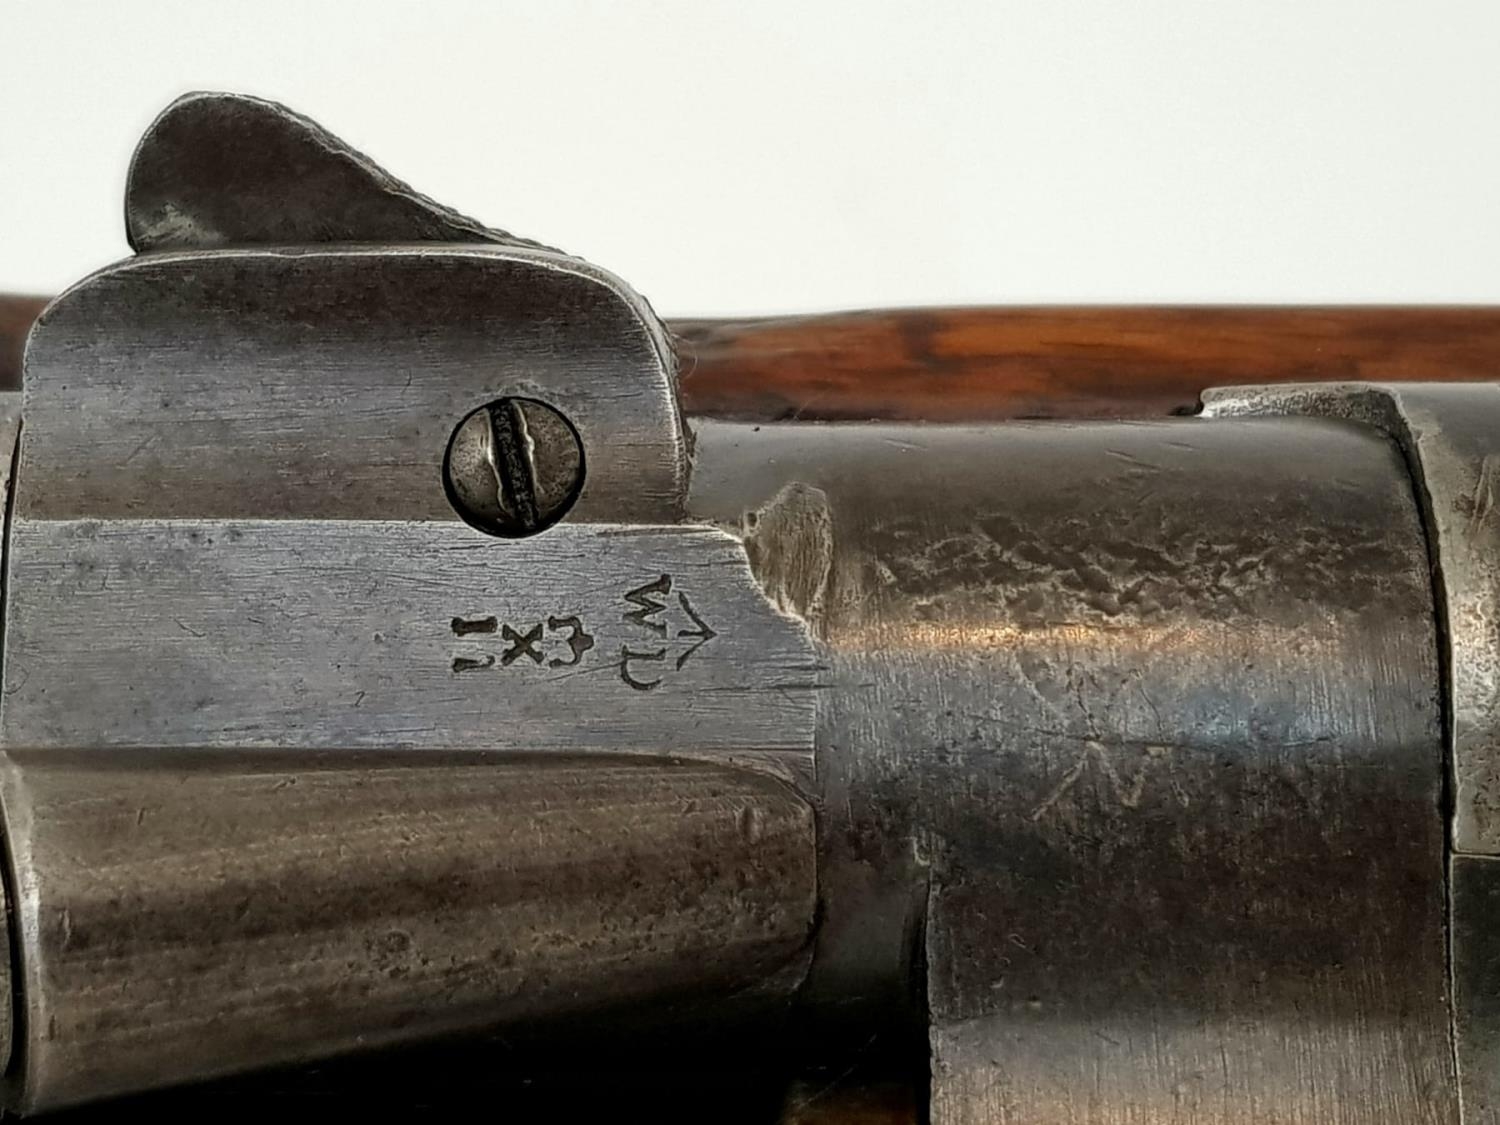 An Enfield Snider Bolt Action .577 Breech Loading Hammer Rifle. Good condition barrel with nice - Image 8 of 8